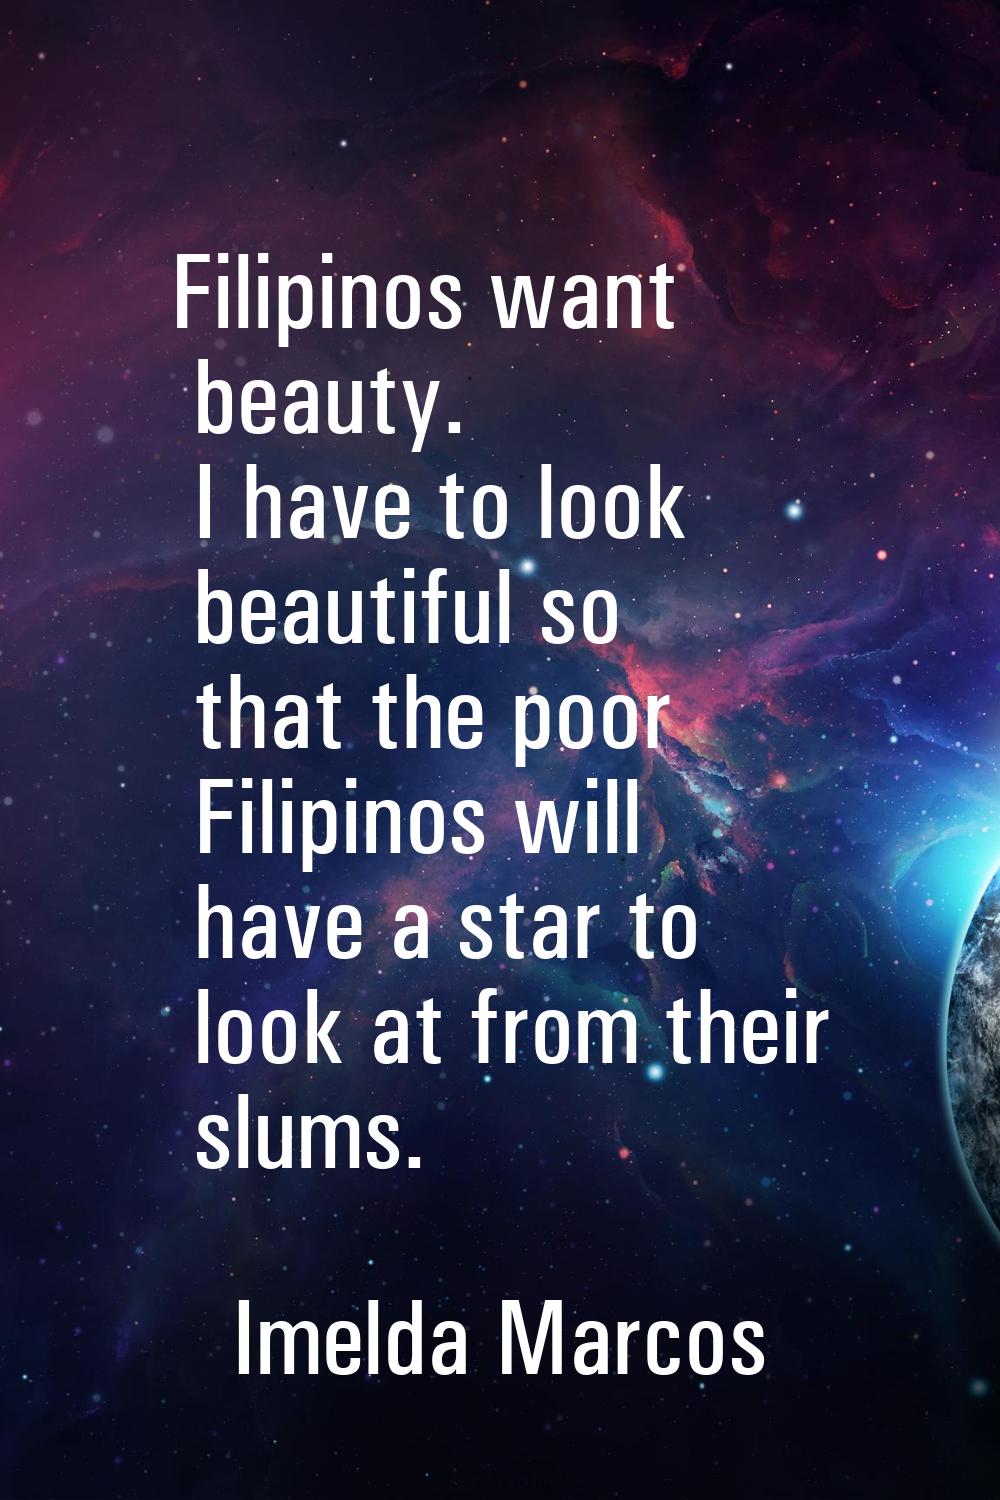 Filipinos want beauty. I have to look beautiful so that the poor Filipinos will have a star to look